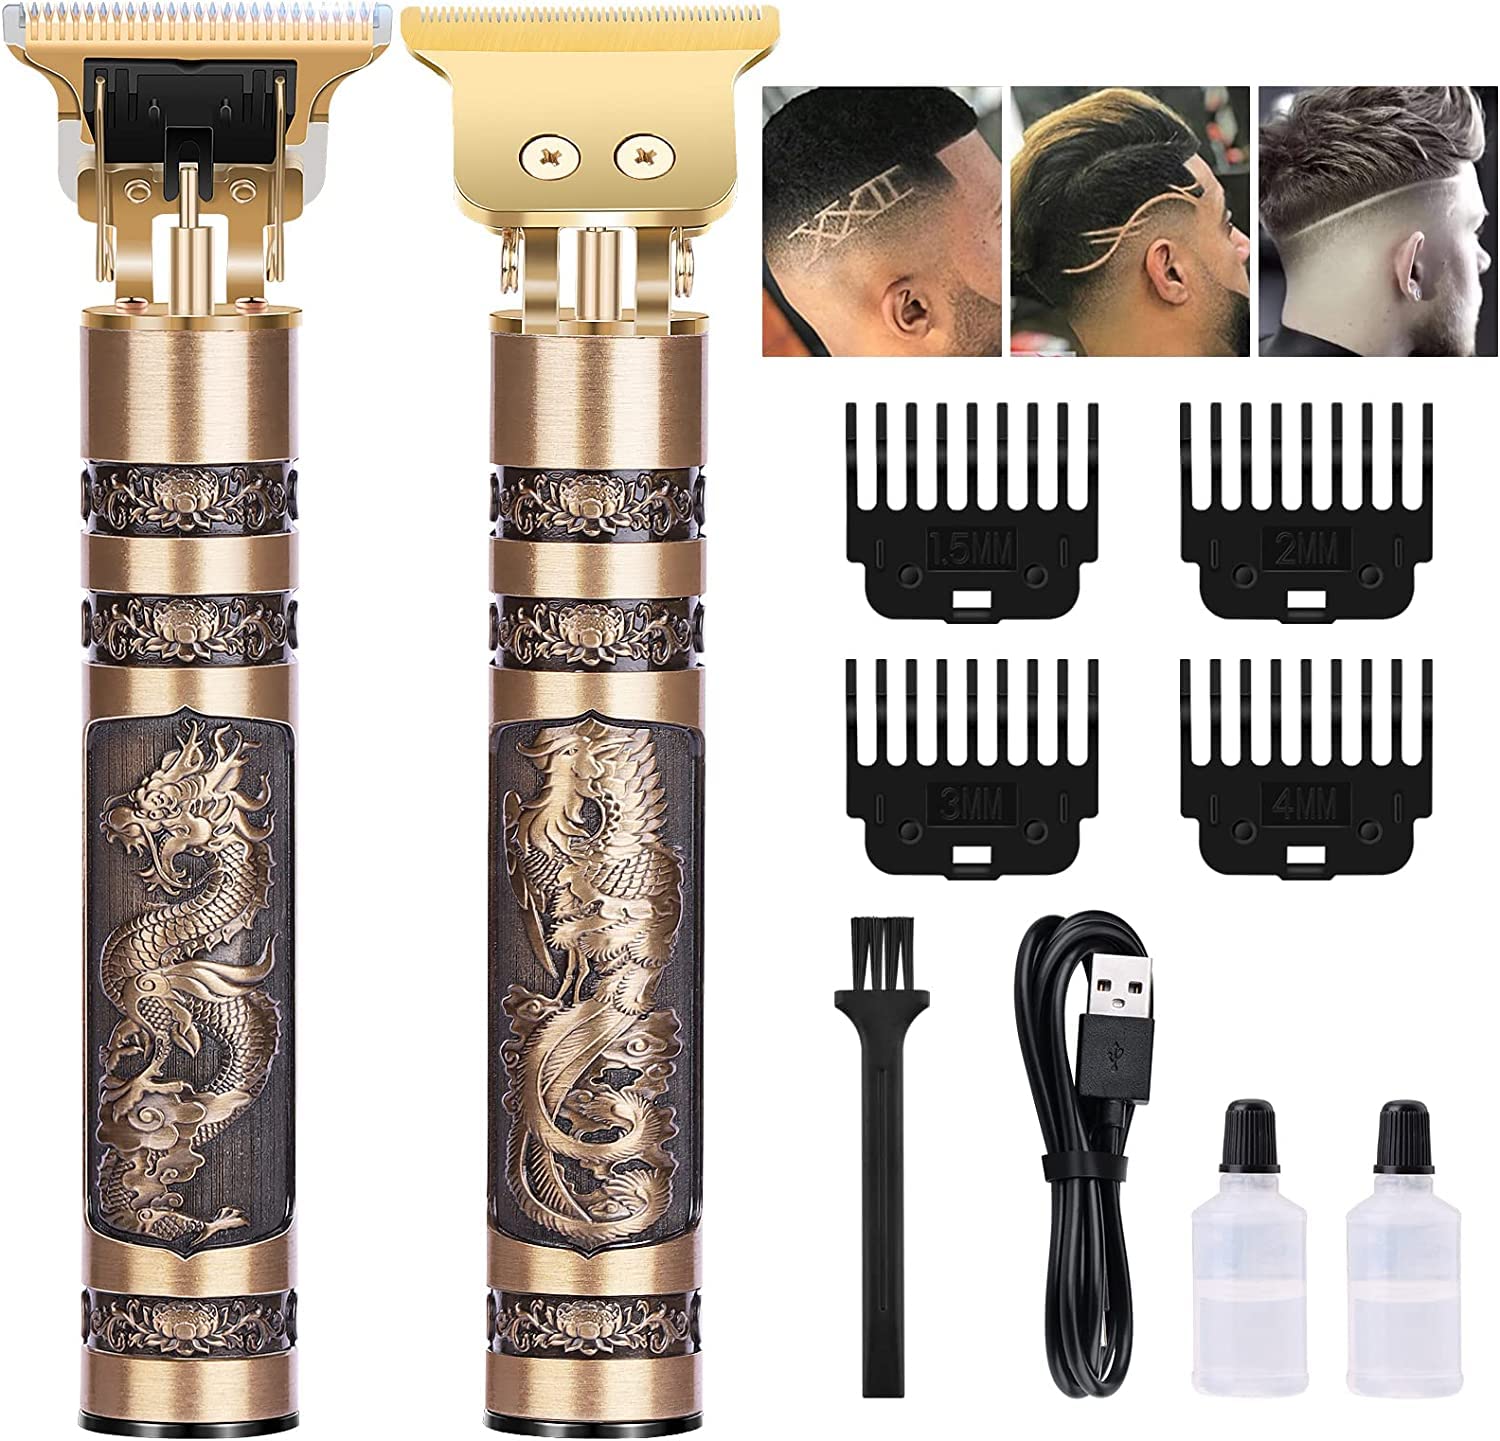 maxtop Trimmer Men Waterproof Rechargeable Professional Dragon Hair Clipper Beard Mustache Shaver For Close Cutting Cordless Electric T-Blade Zero Gapped...